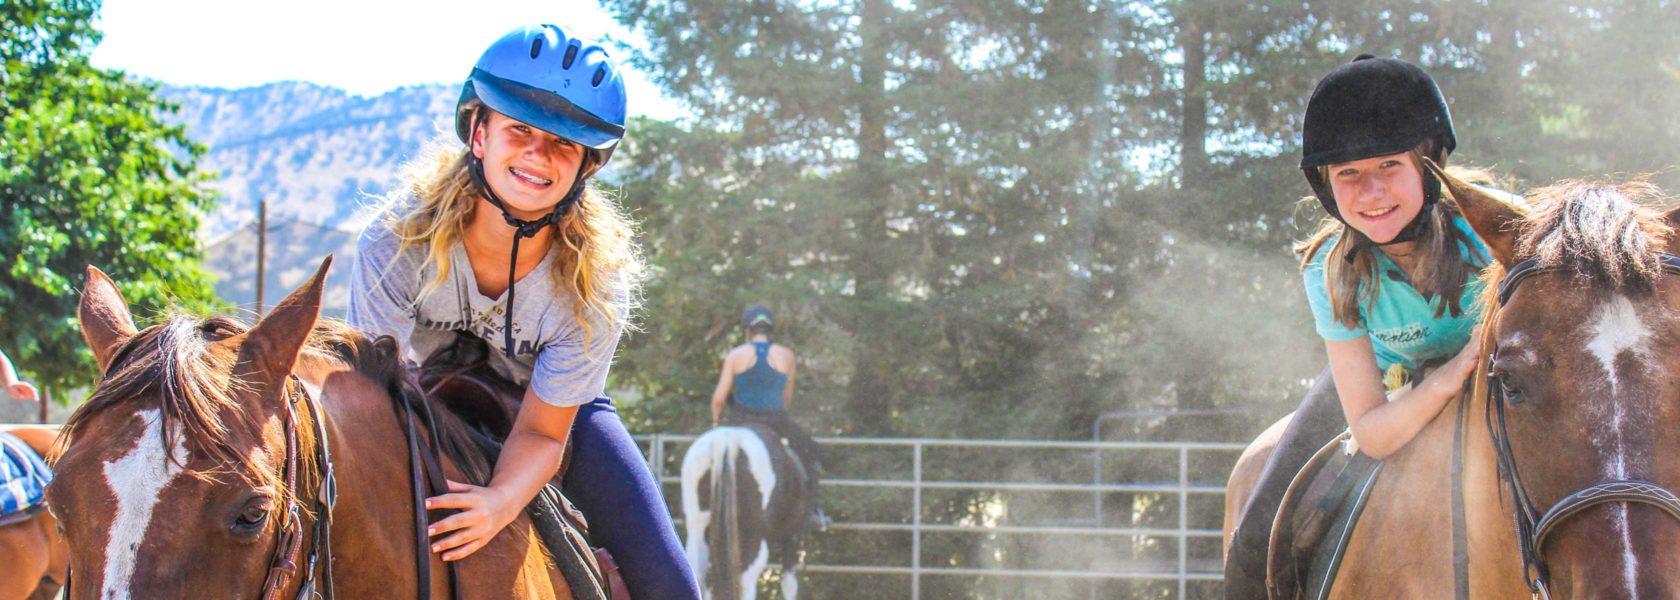 Campers smiling while riding horses